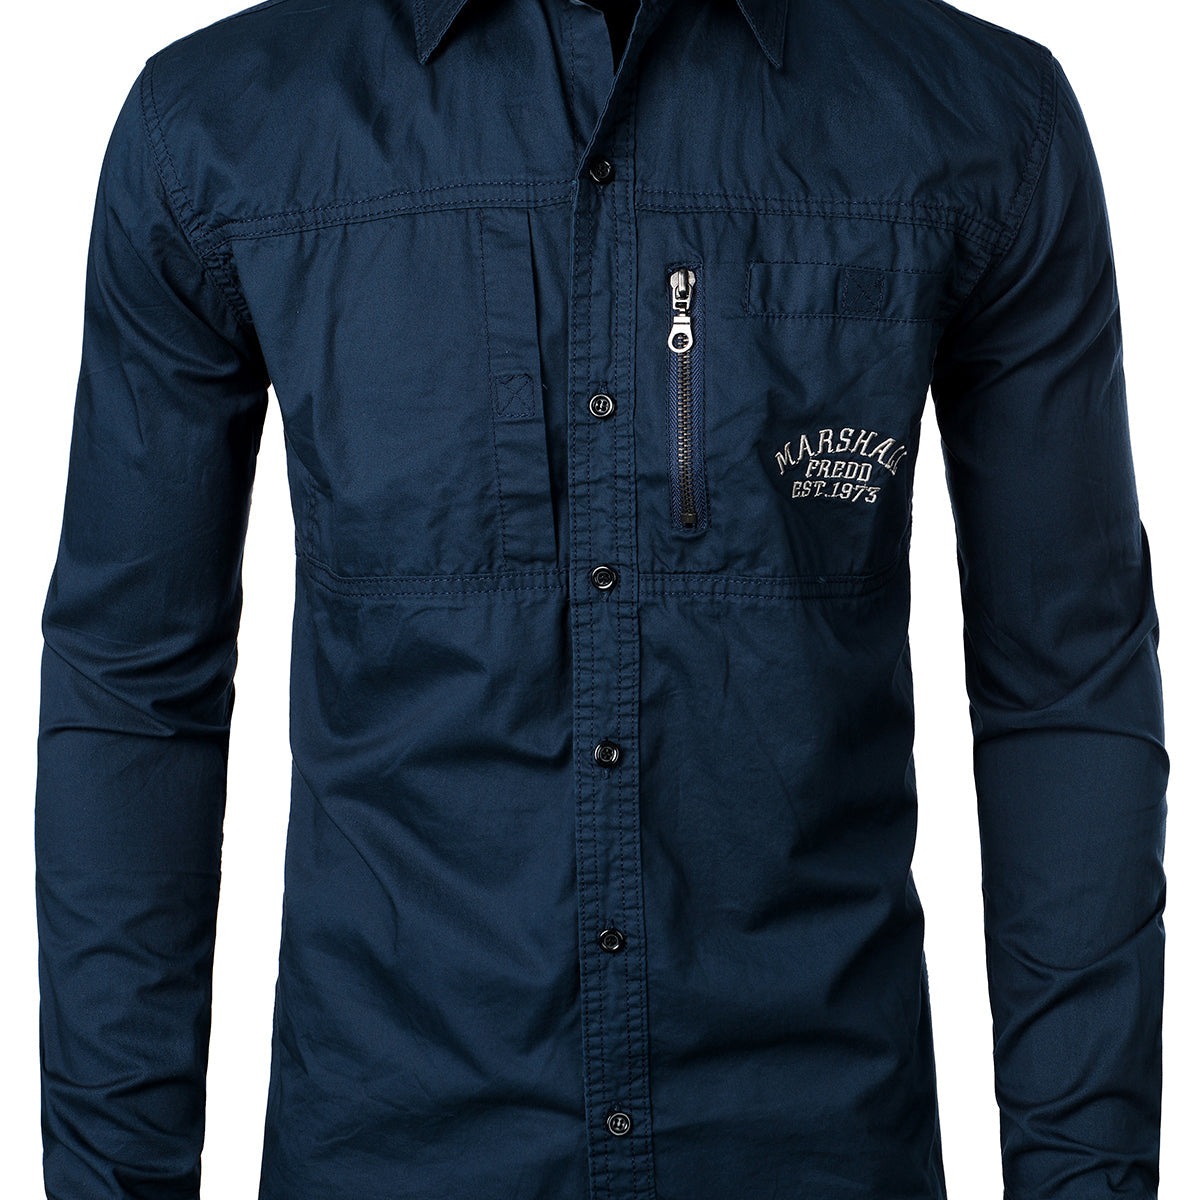 Men's Military Outdoor Leisure Lapel Cotton Long-sleeved Shirt